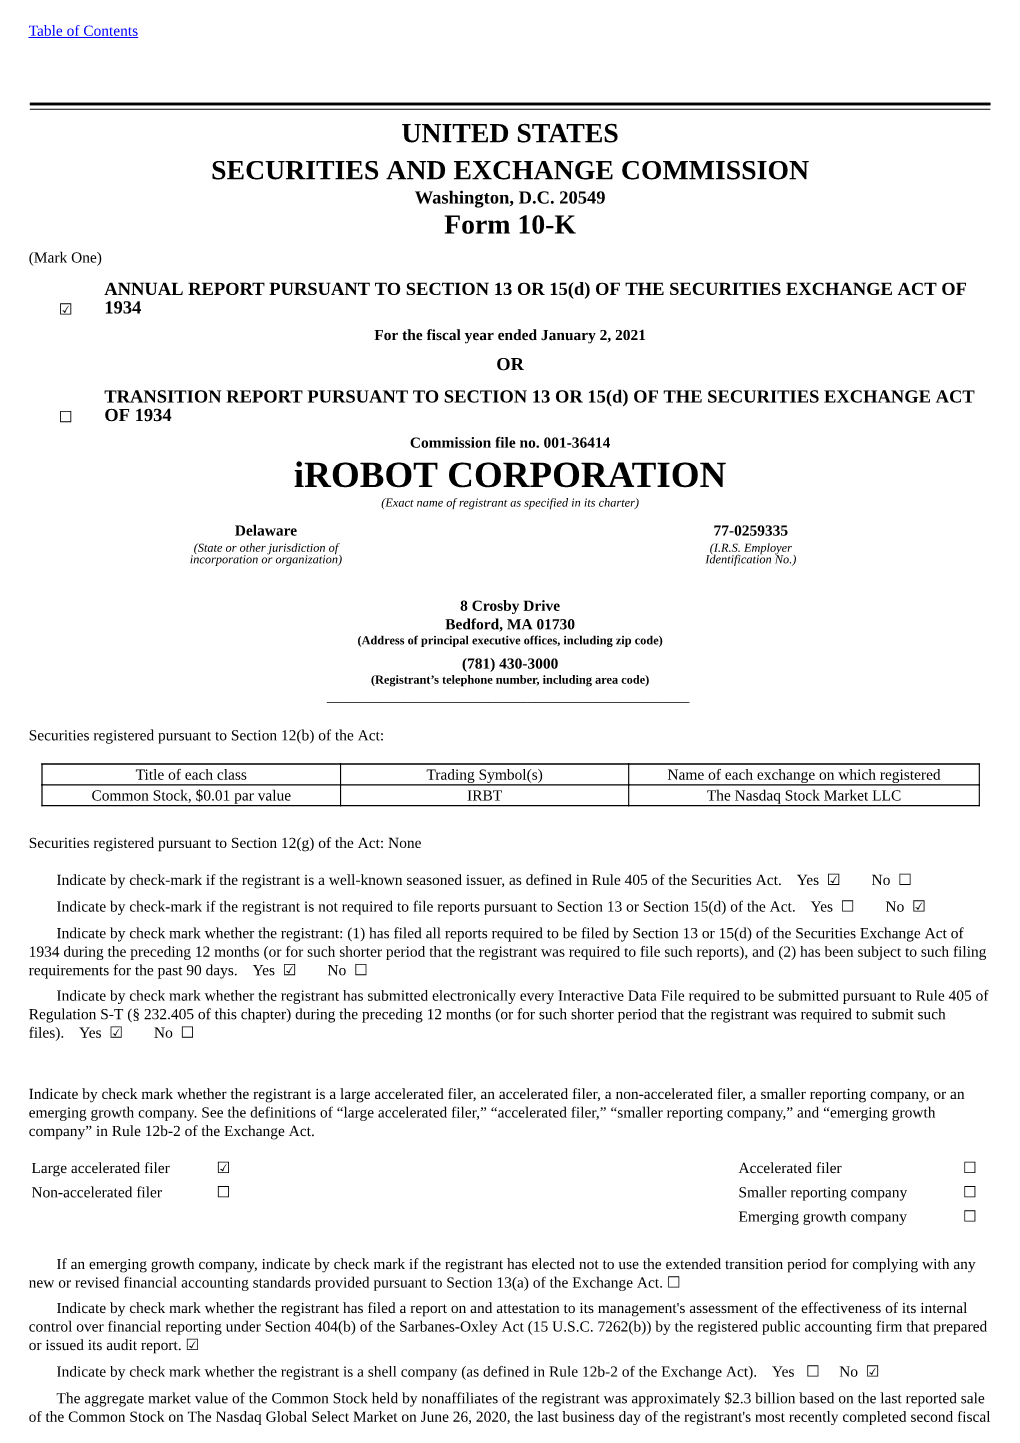 Irobot CORPORATION (Exact Name of Registrant As Specified in Its Charter) Delaware 77-0259335 (State Or Other Jurisdiction of (I.R.S